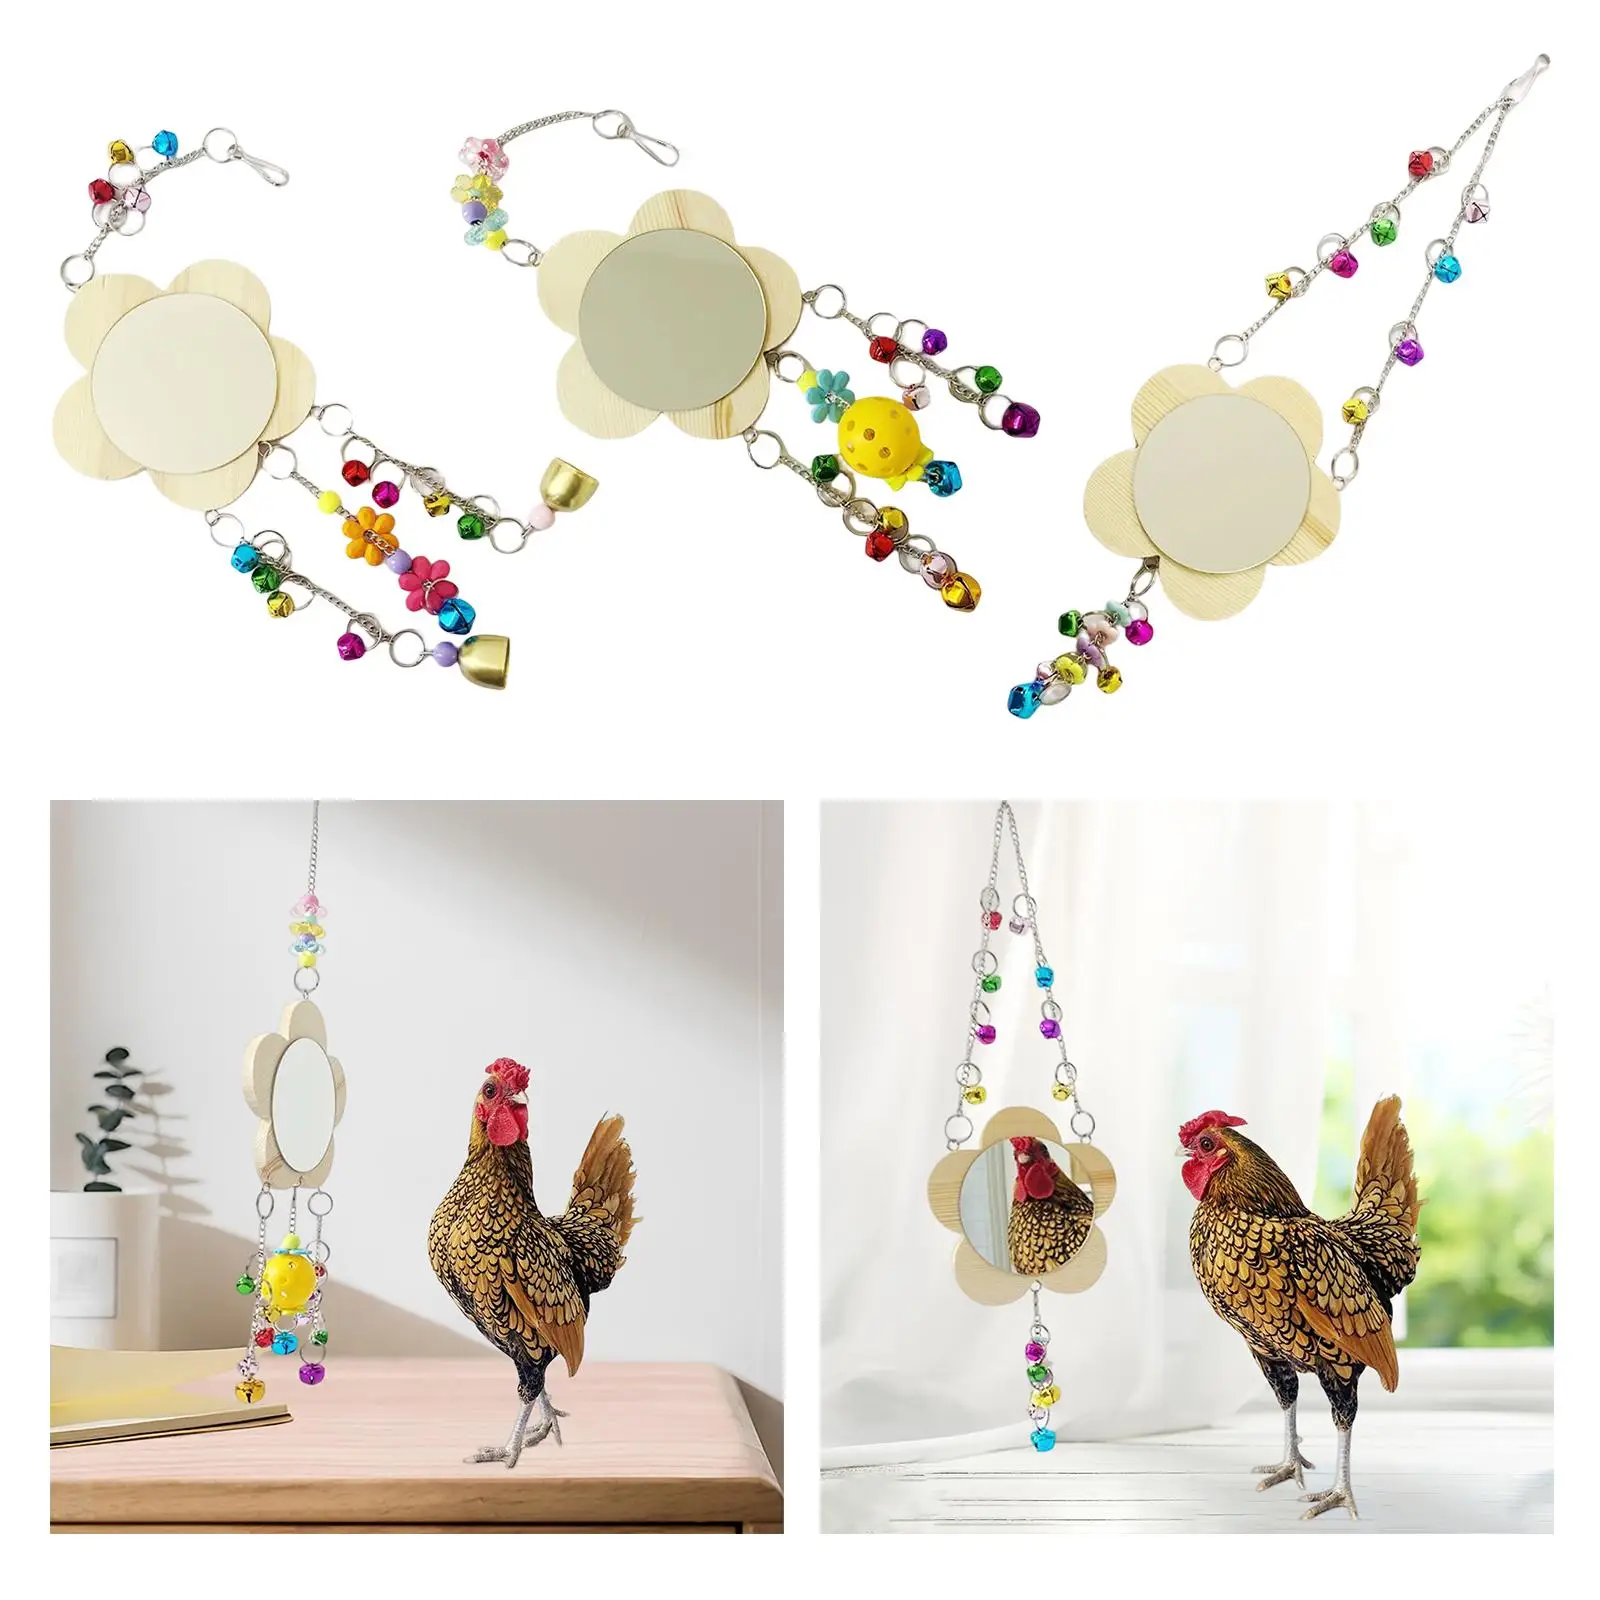 Hens Chicken Mirror Toy with Bell Grinding Molar Swing Toys Holder Chicken Xylophone Toy for Hens Birds Accessory Decoration